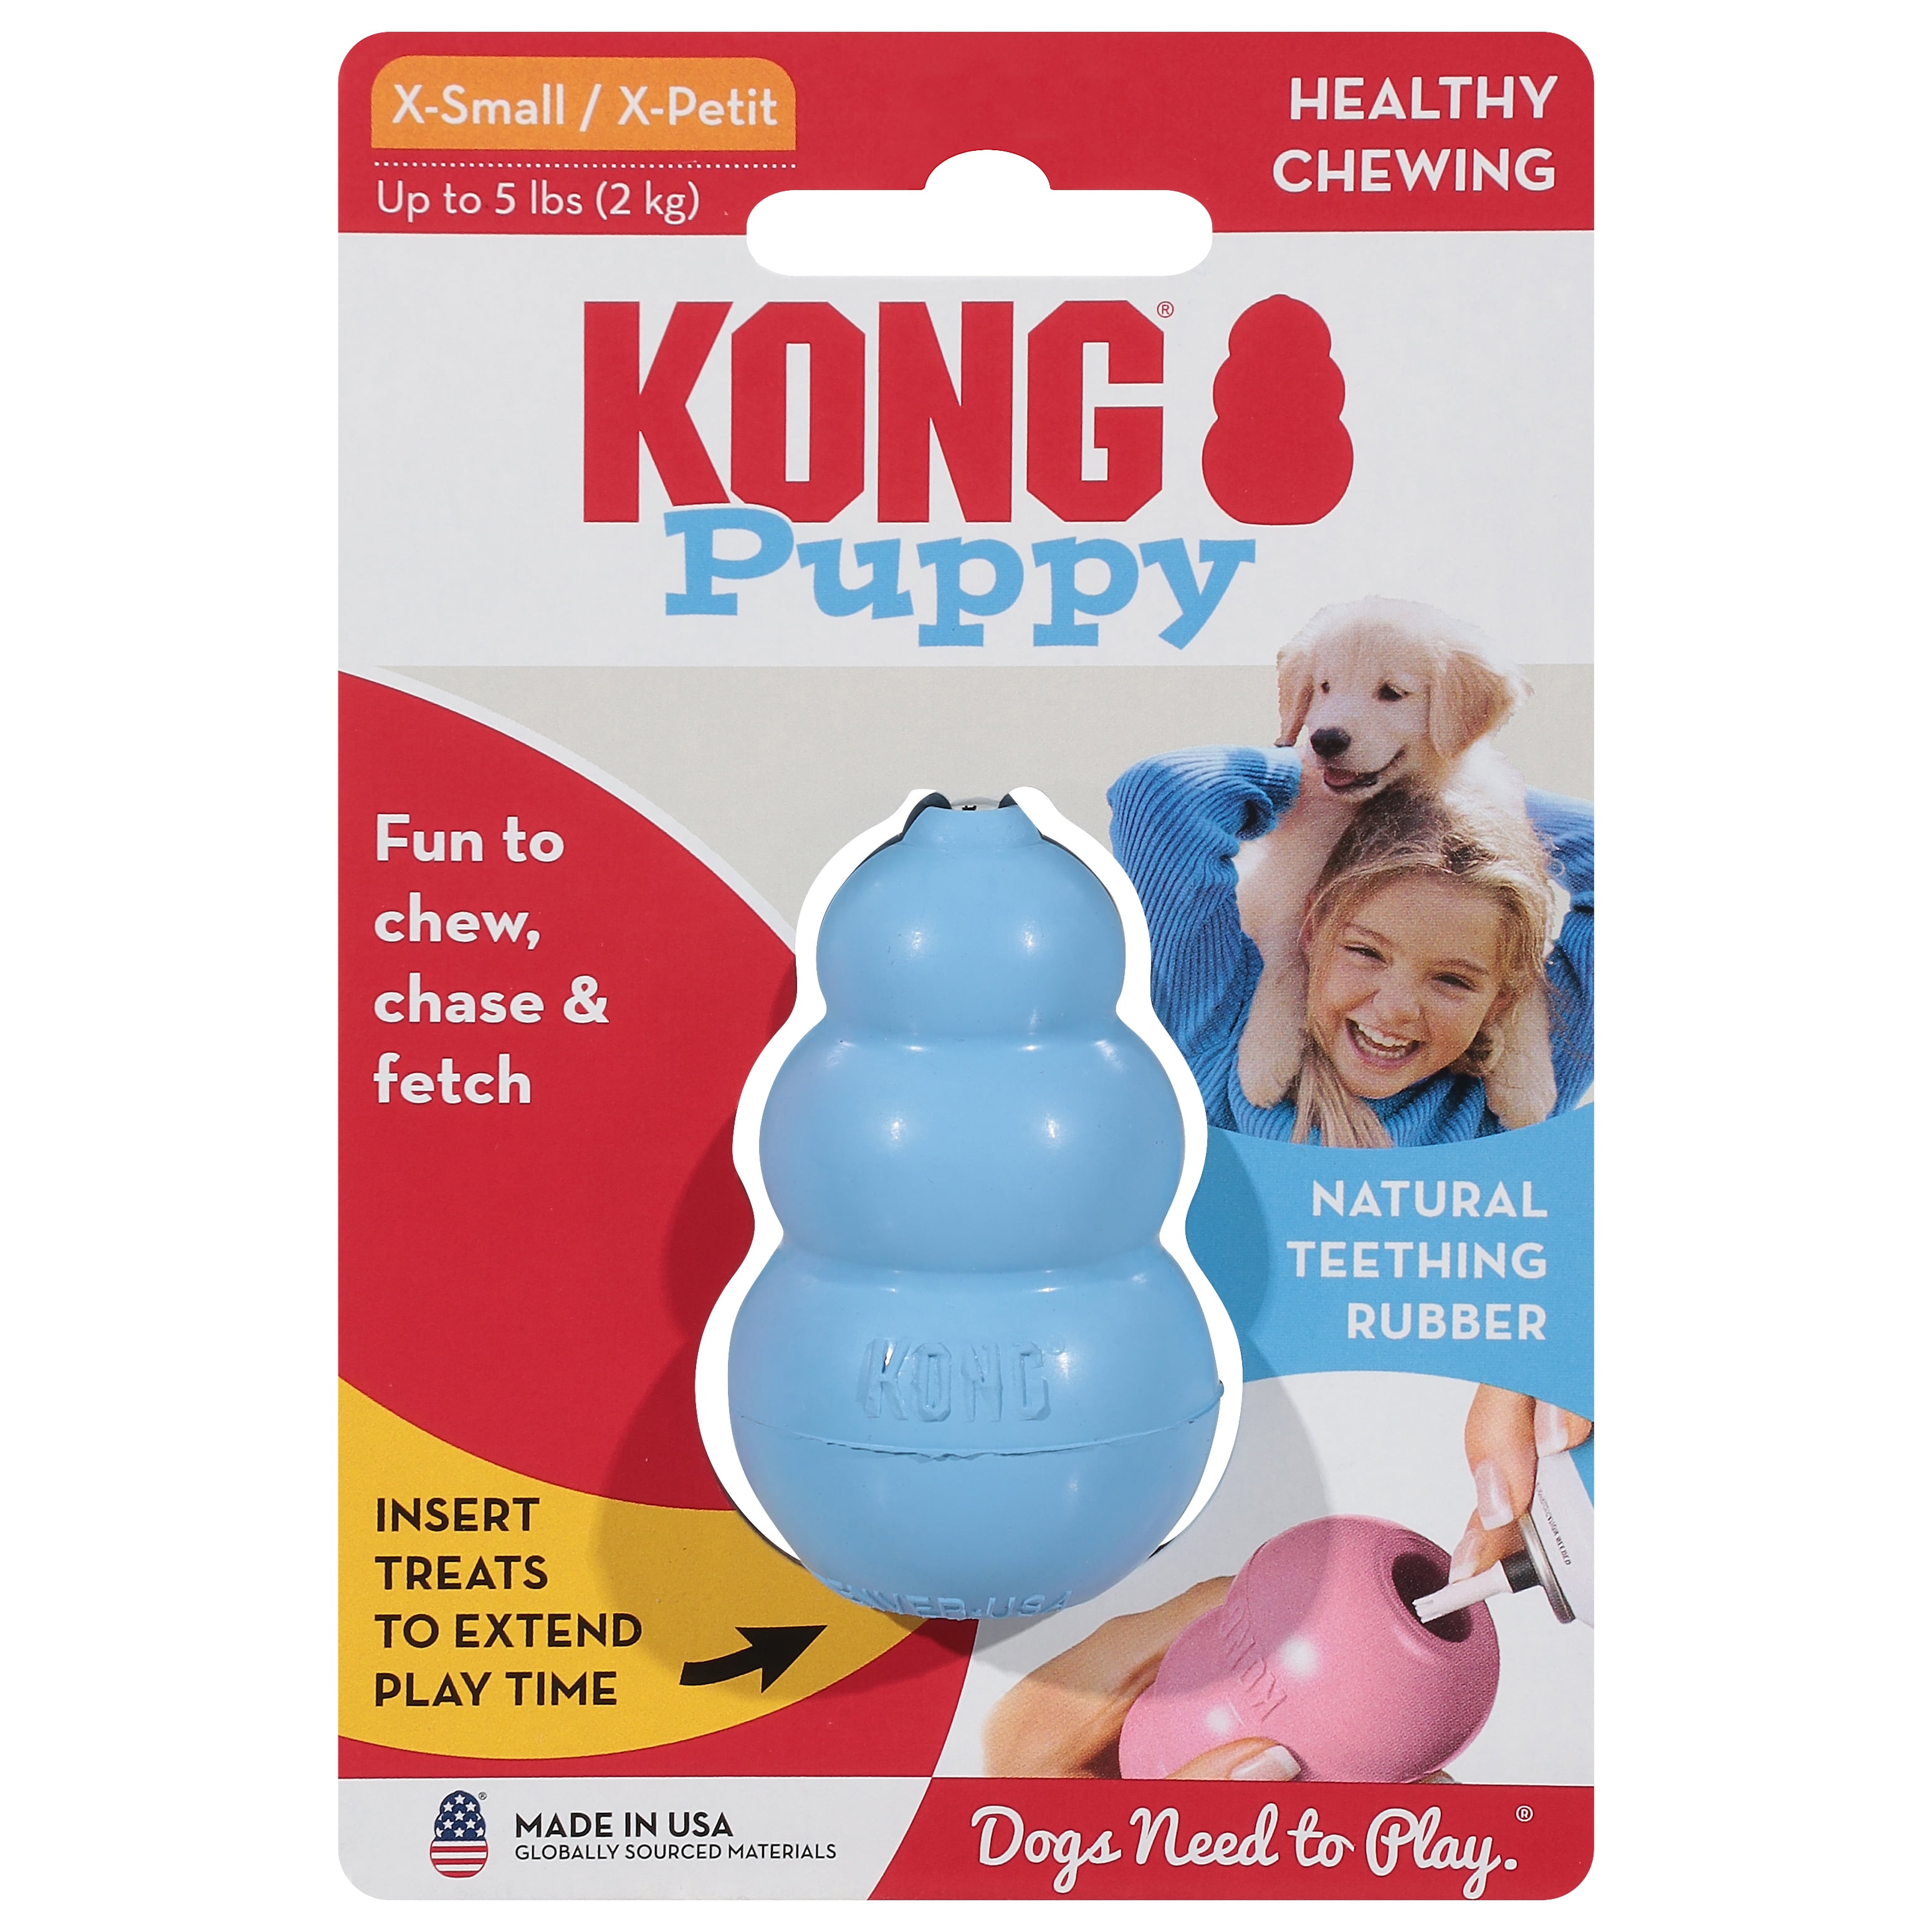 Kong Puppy Chew Dog Toy, Blue, Small